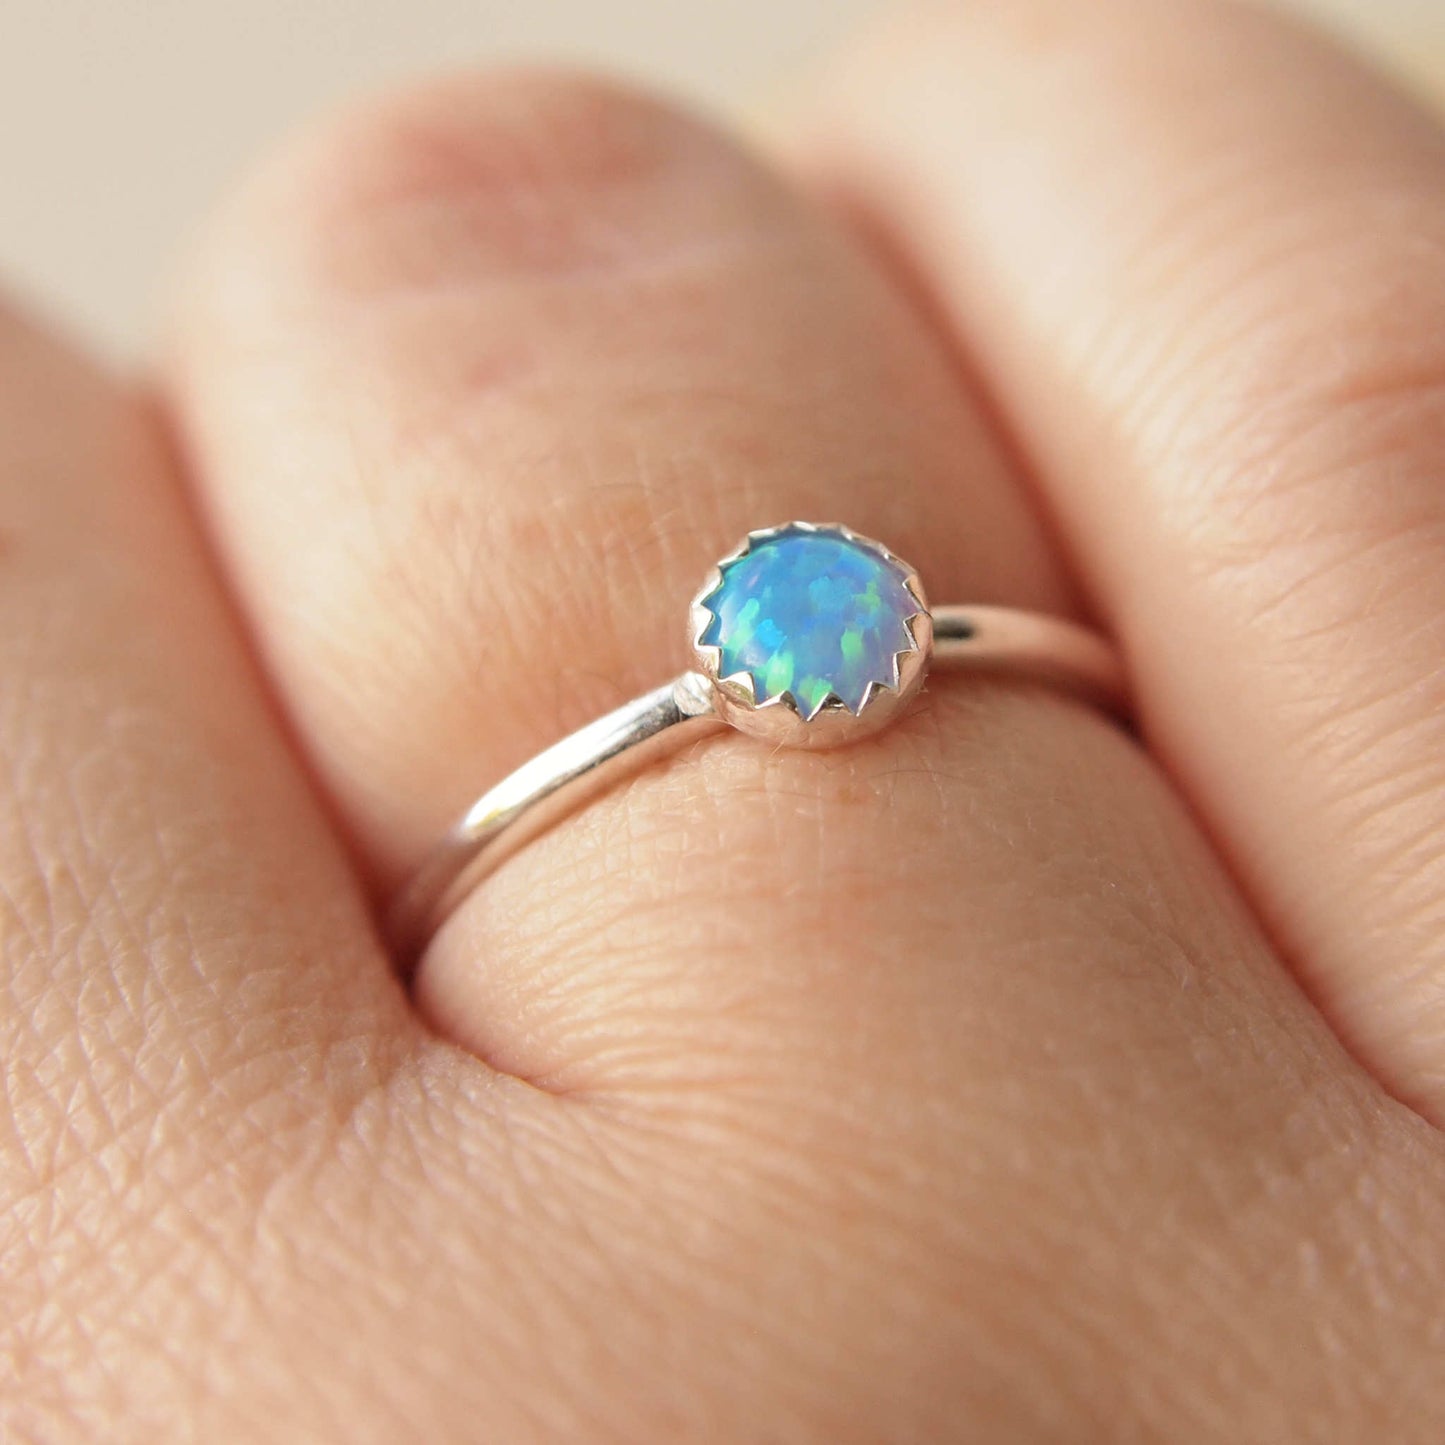 Simple style Lab Opal and Sterling Silver single Solitaire Ring with Lab Opal. Opal is Birthstone for October. The round 5mm gem is a blue opal with lots of iridescence. Handmade by Maram Jewellery in Scotland